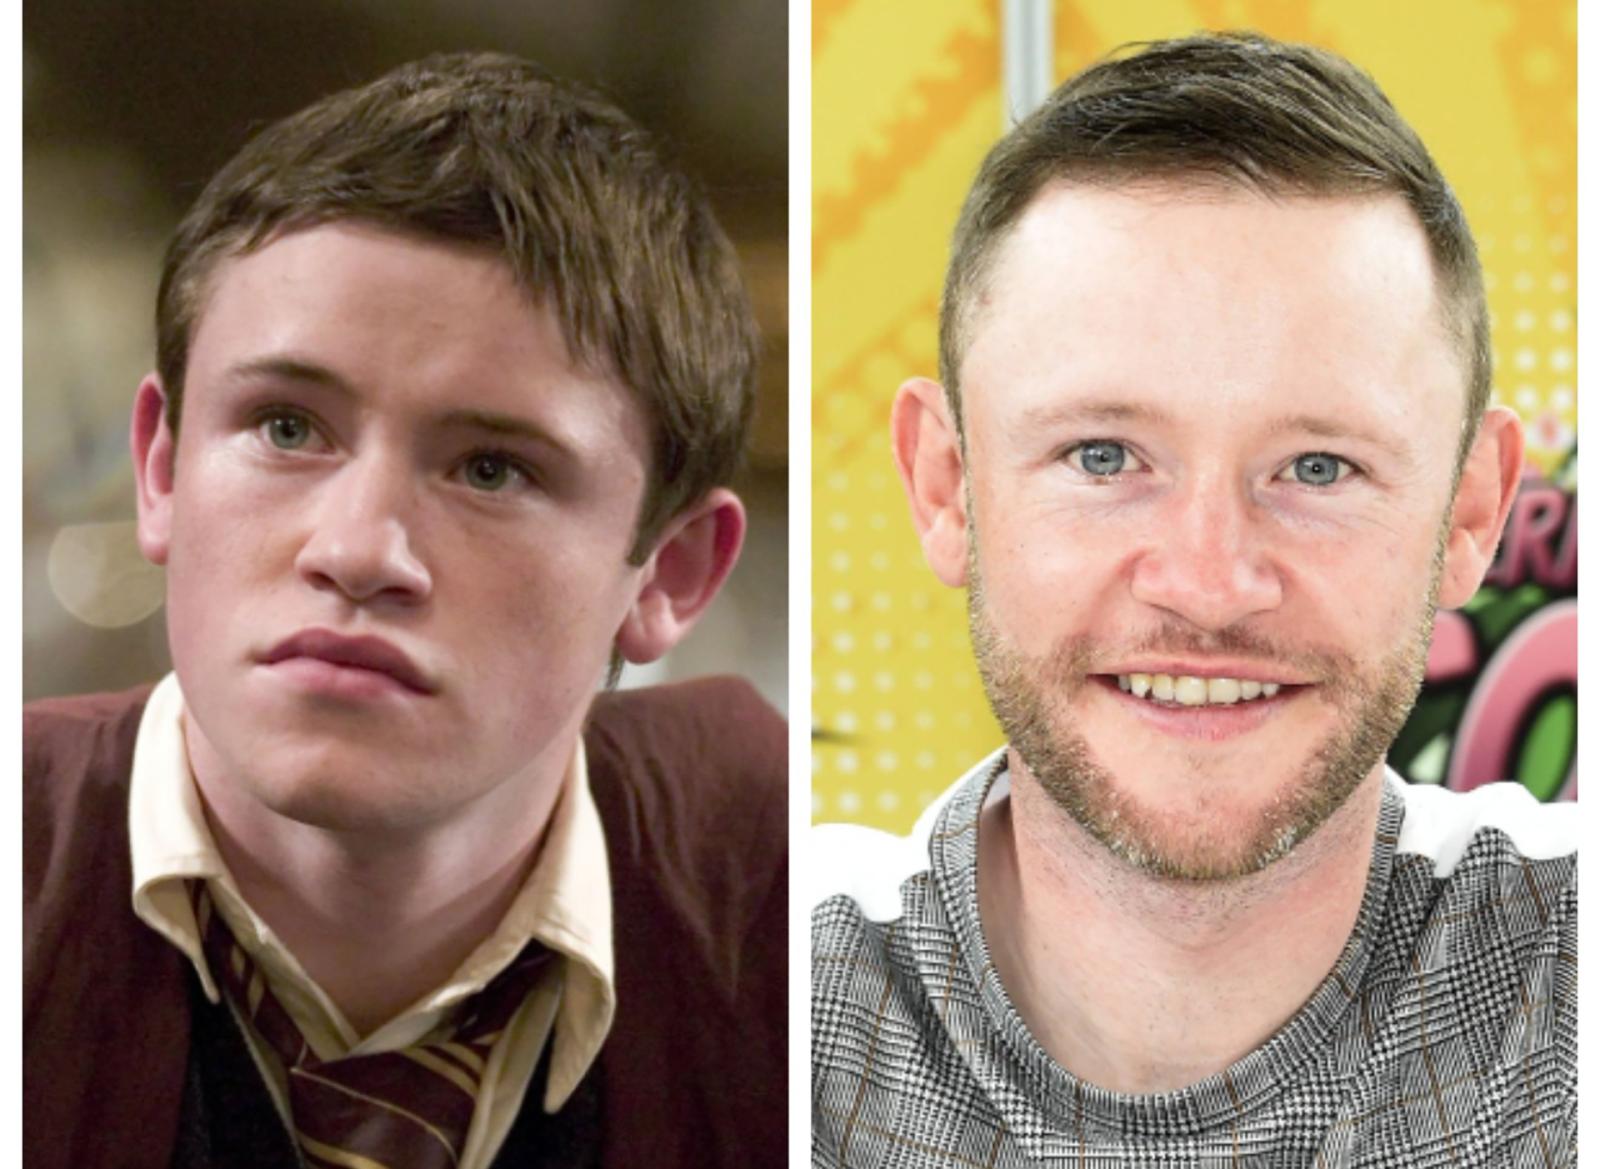 20 Years On: Here's What The Cast of Harry Potter Look Like Now - image 5